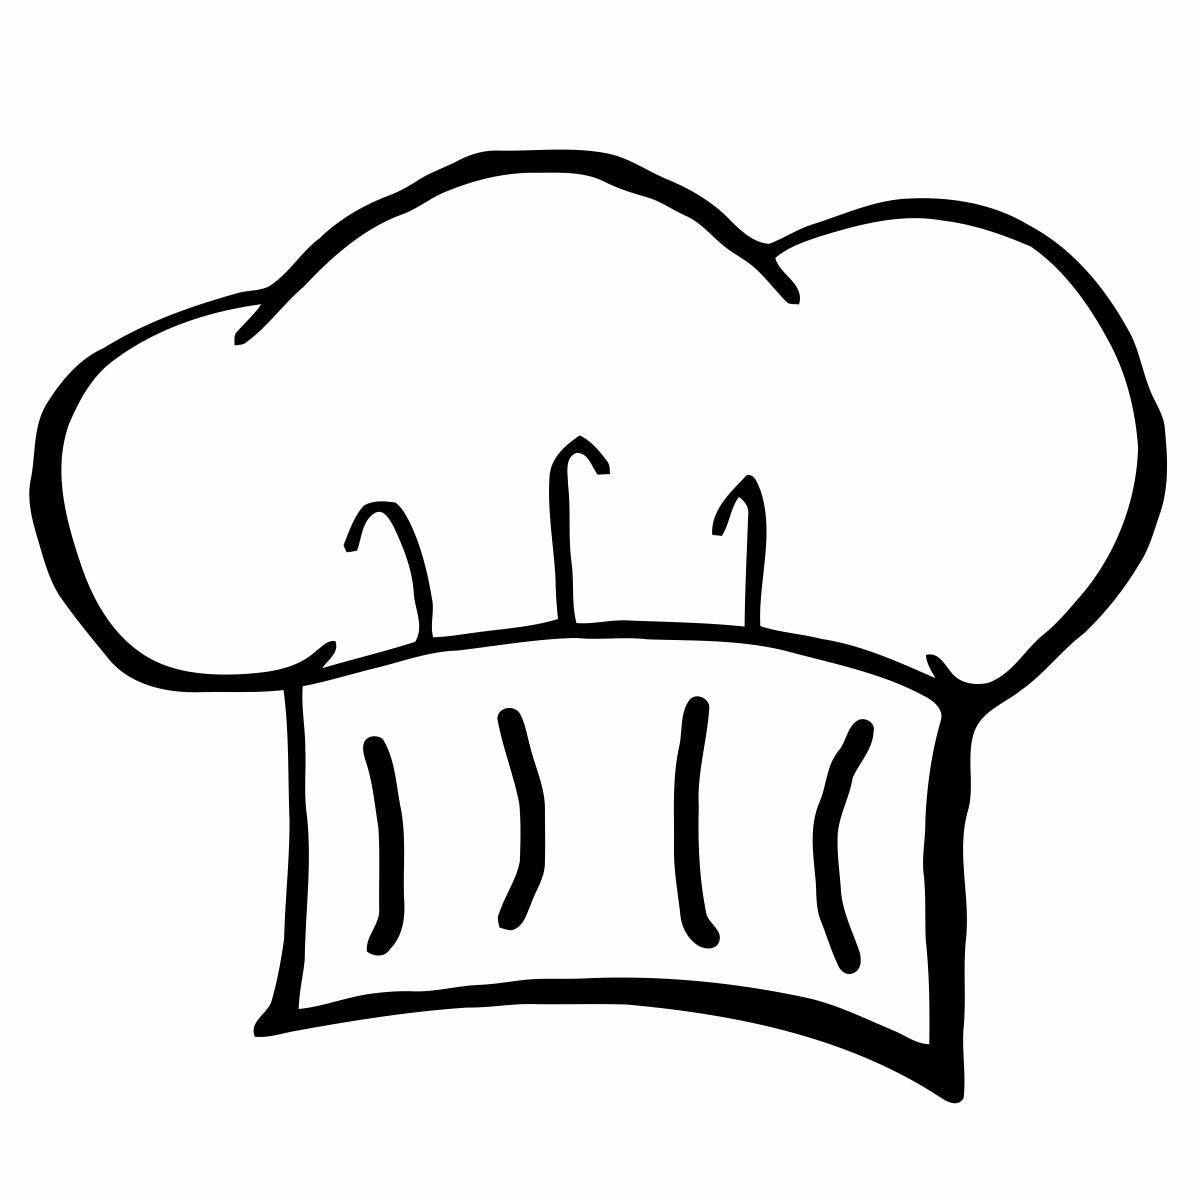 Playful chef hat coloring page